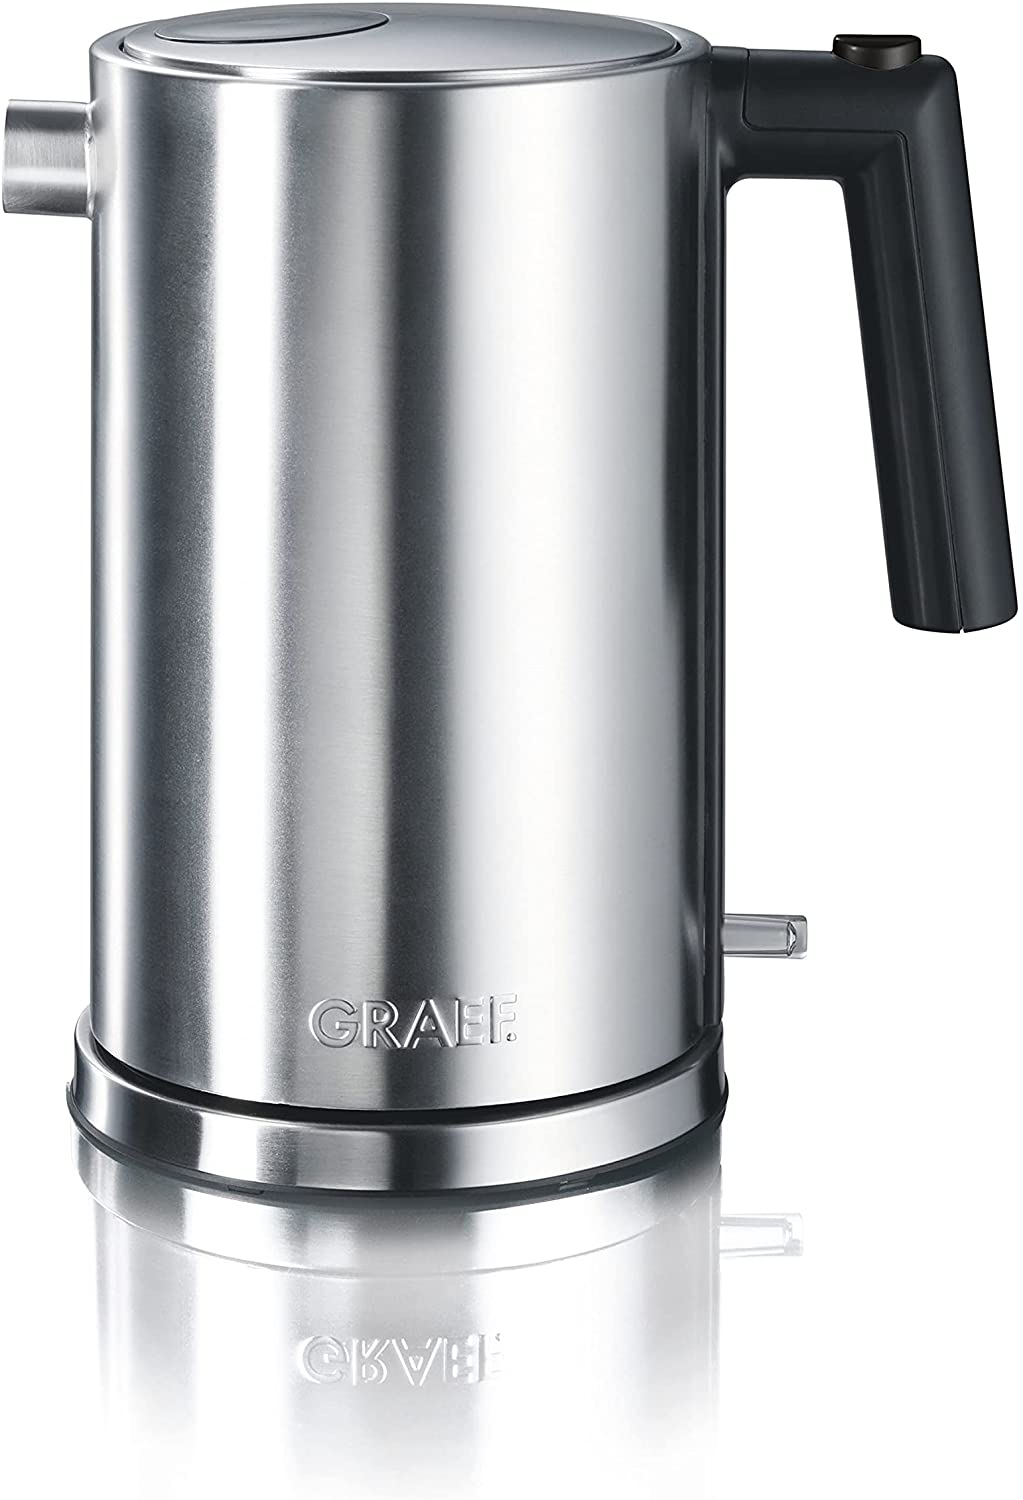 Graef WK600EU Kettle, Stainless Steel, 1.5 Litres, Stainless Steel, Frosted